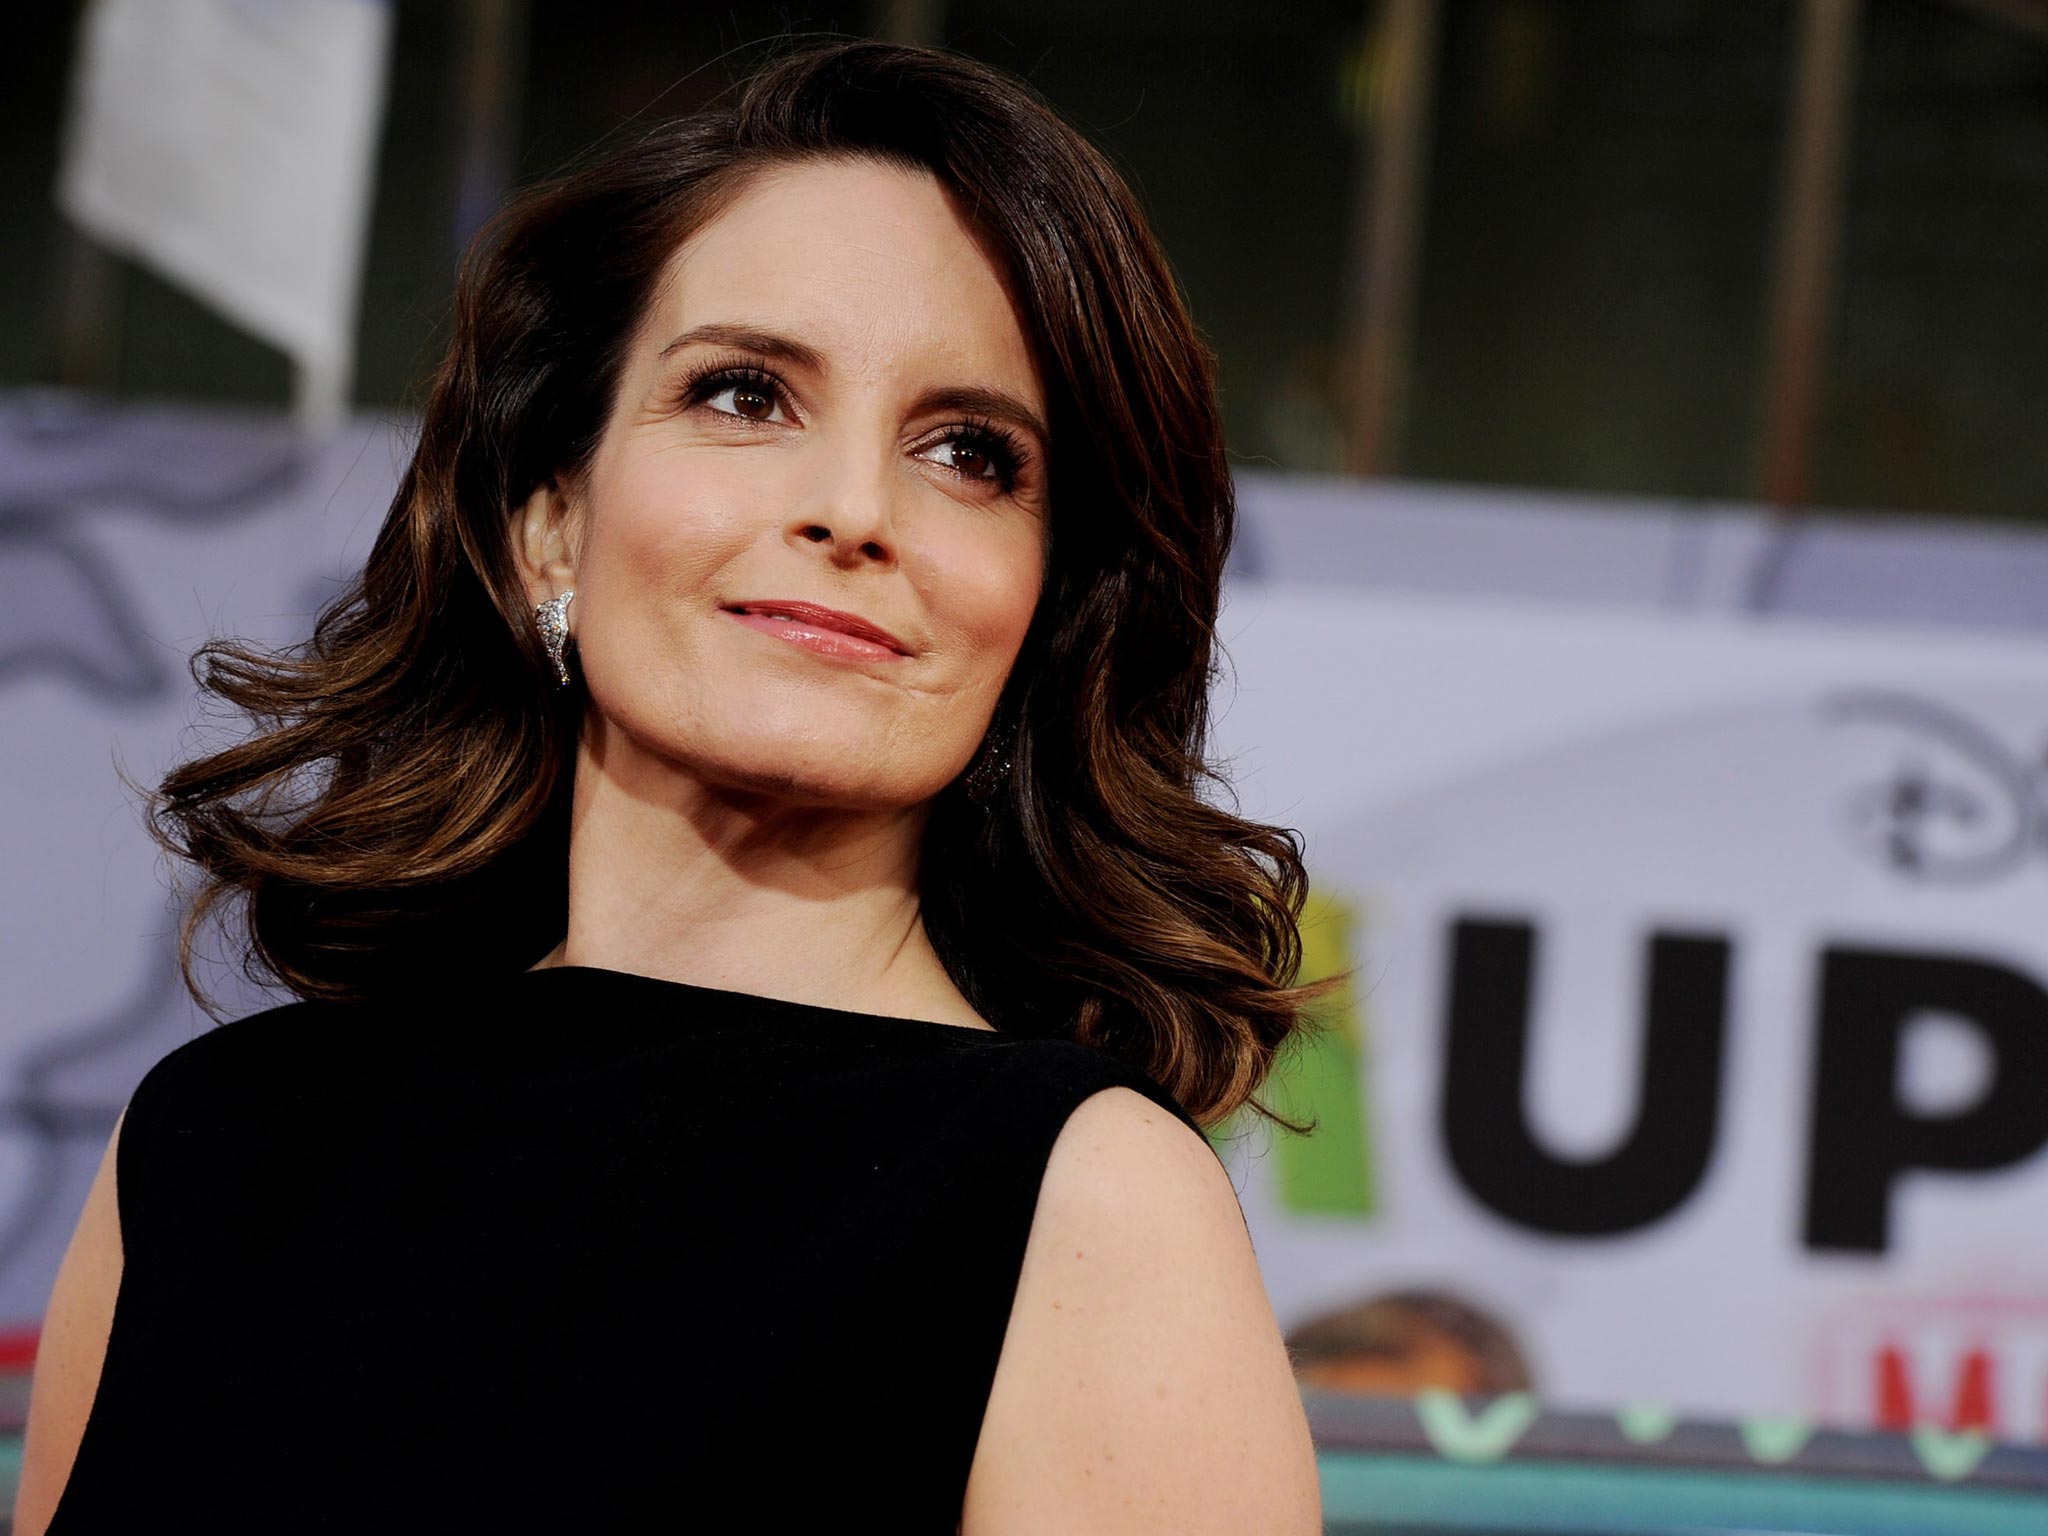 Tina Fey, whose long list of credits includes SNL, 30 Rock and the latest Muppets movie, is favourite to take over as host of the Daily Show